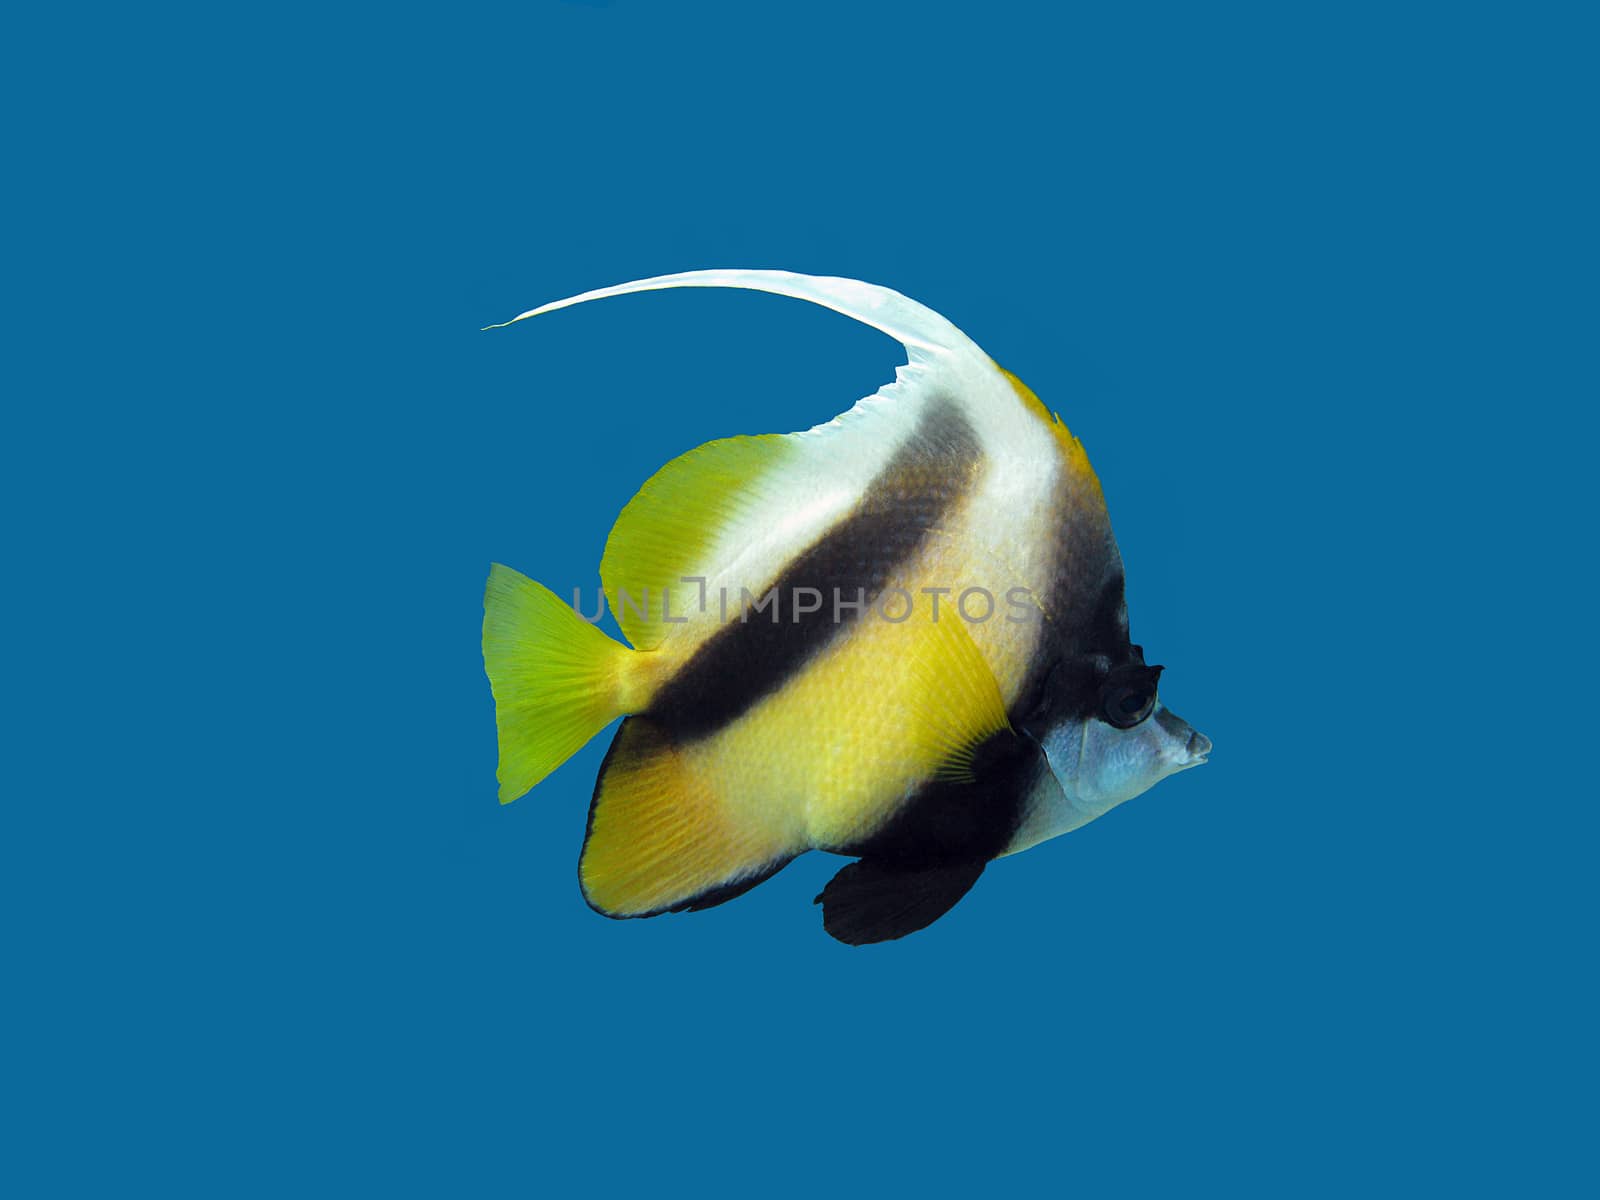 single coral reef's exotic fish - bunnerfish isolated on blue background